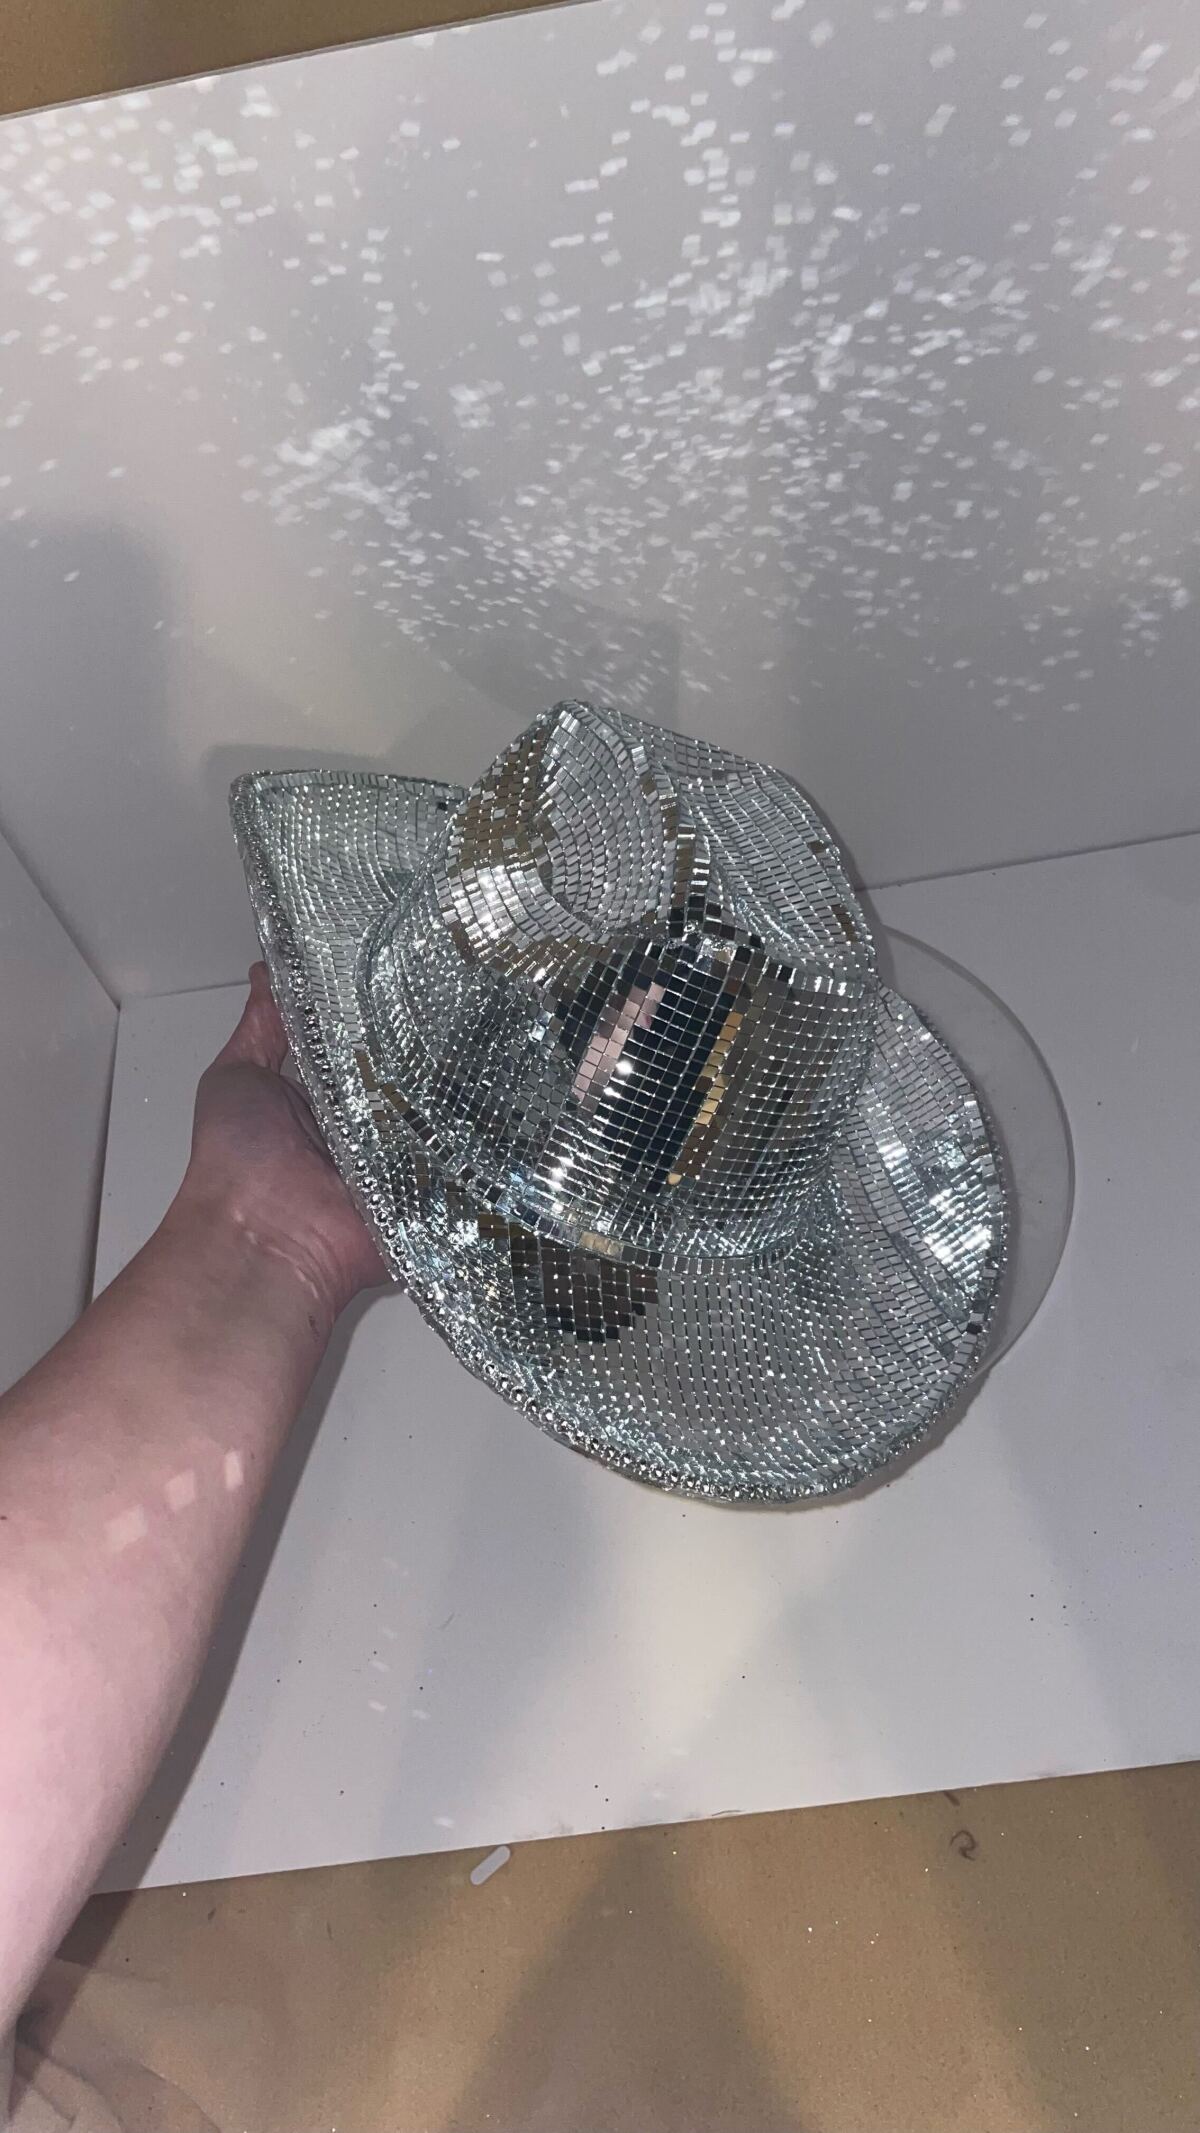 A cowboy hat covered in disco balls held up to the ceiling with light refracting off the walls